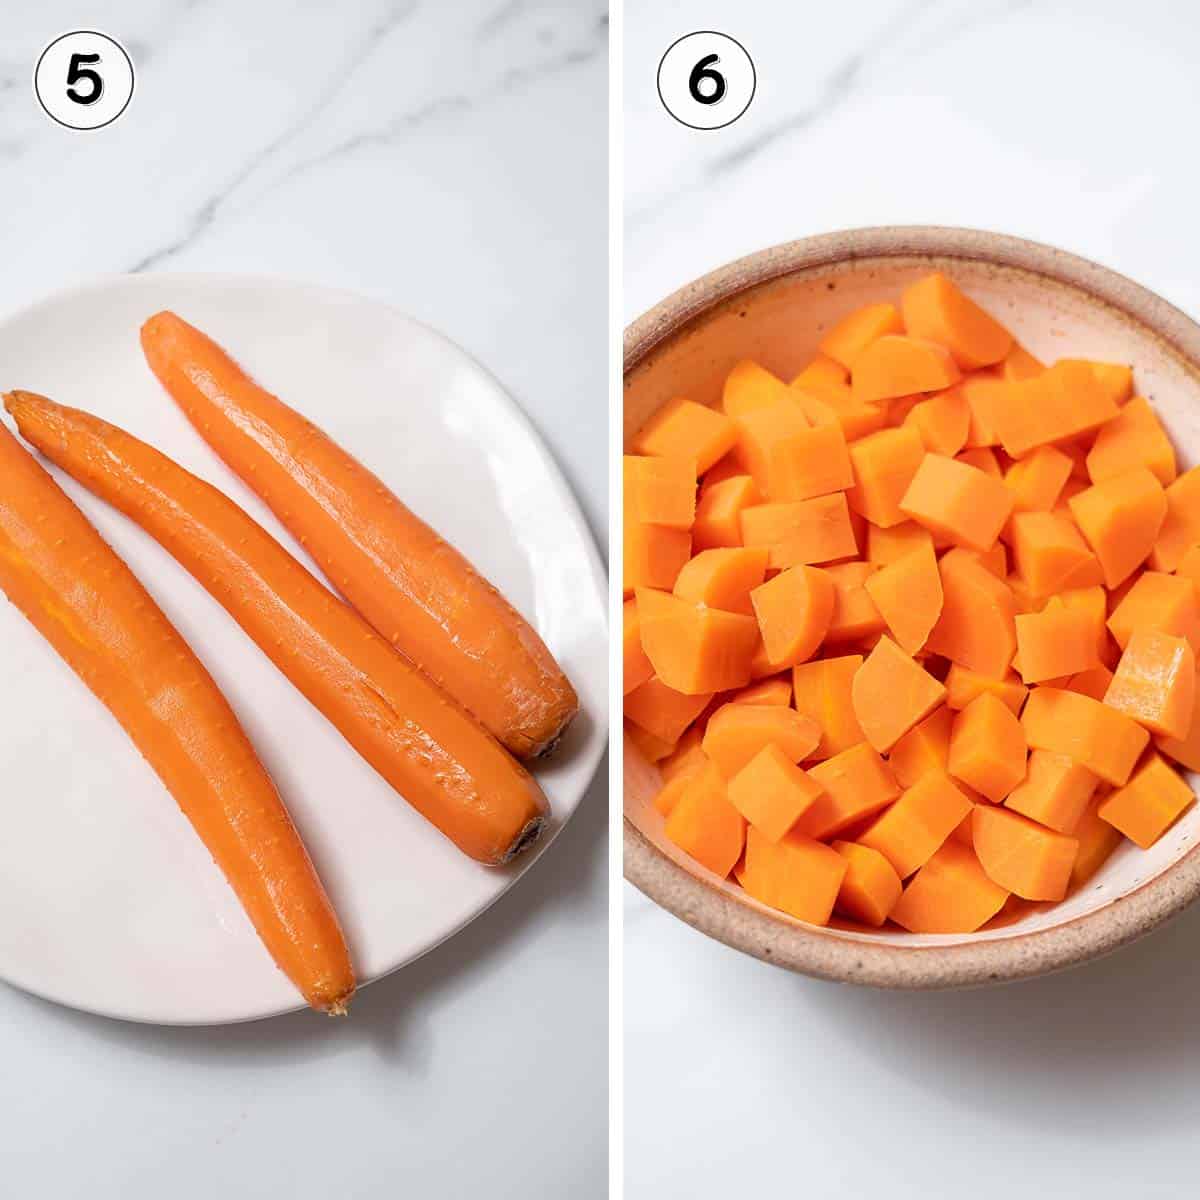 peeled, boiled, and cubed carrots.